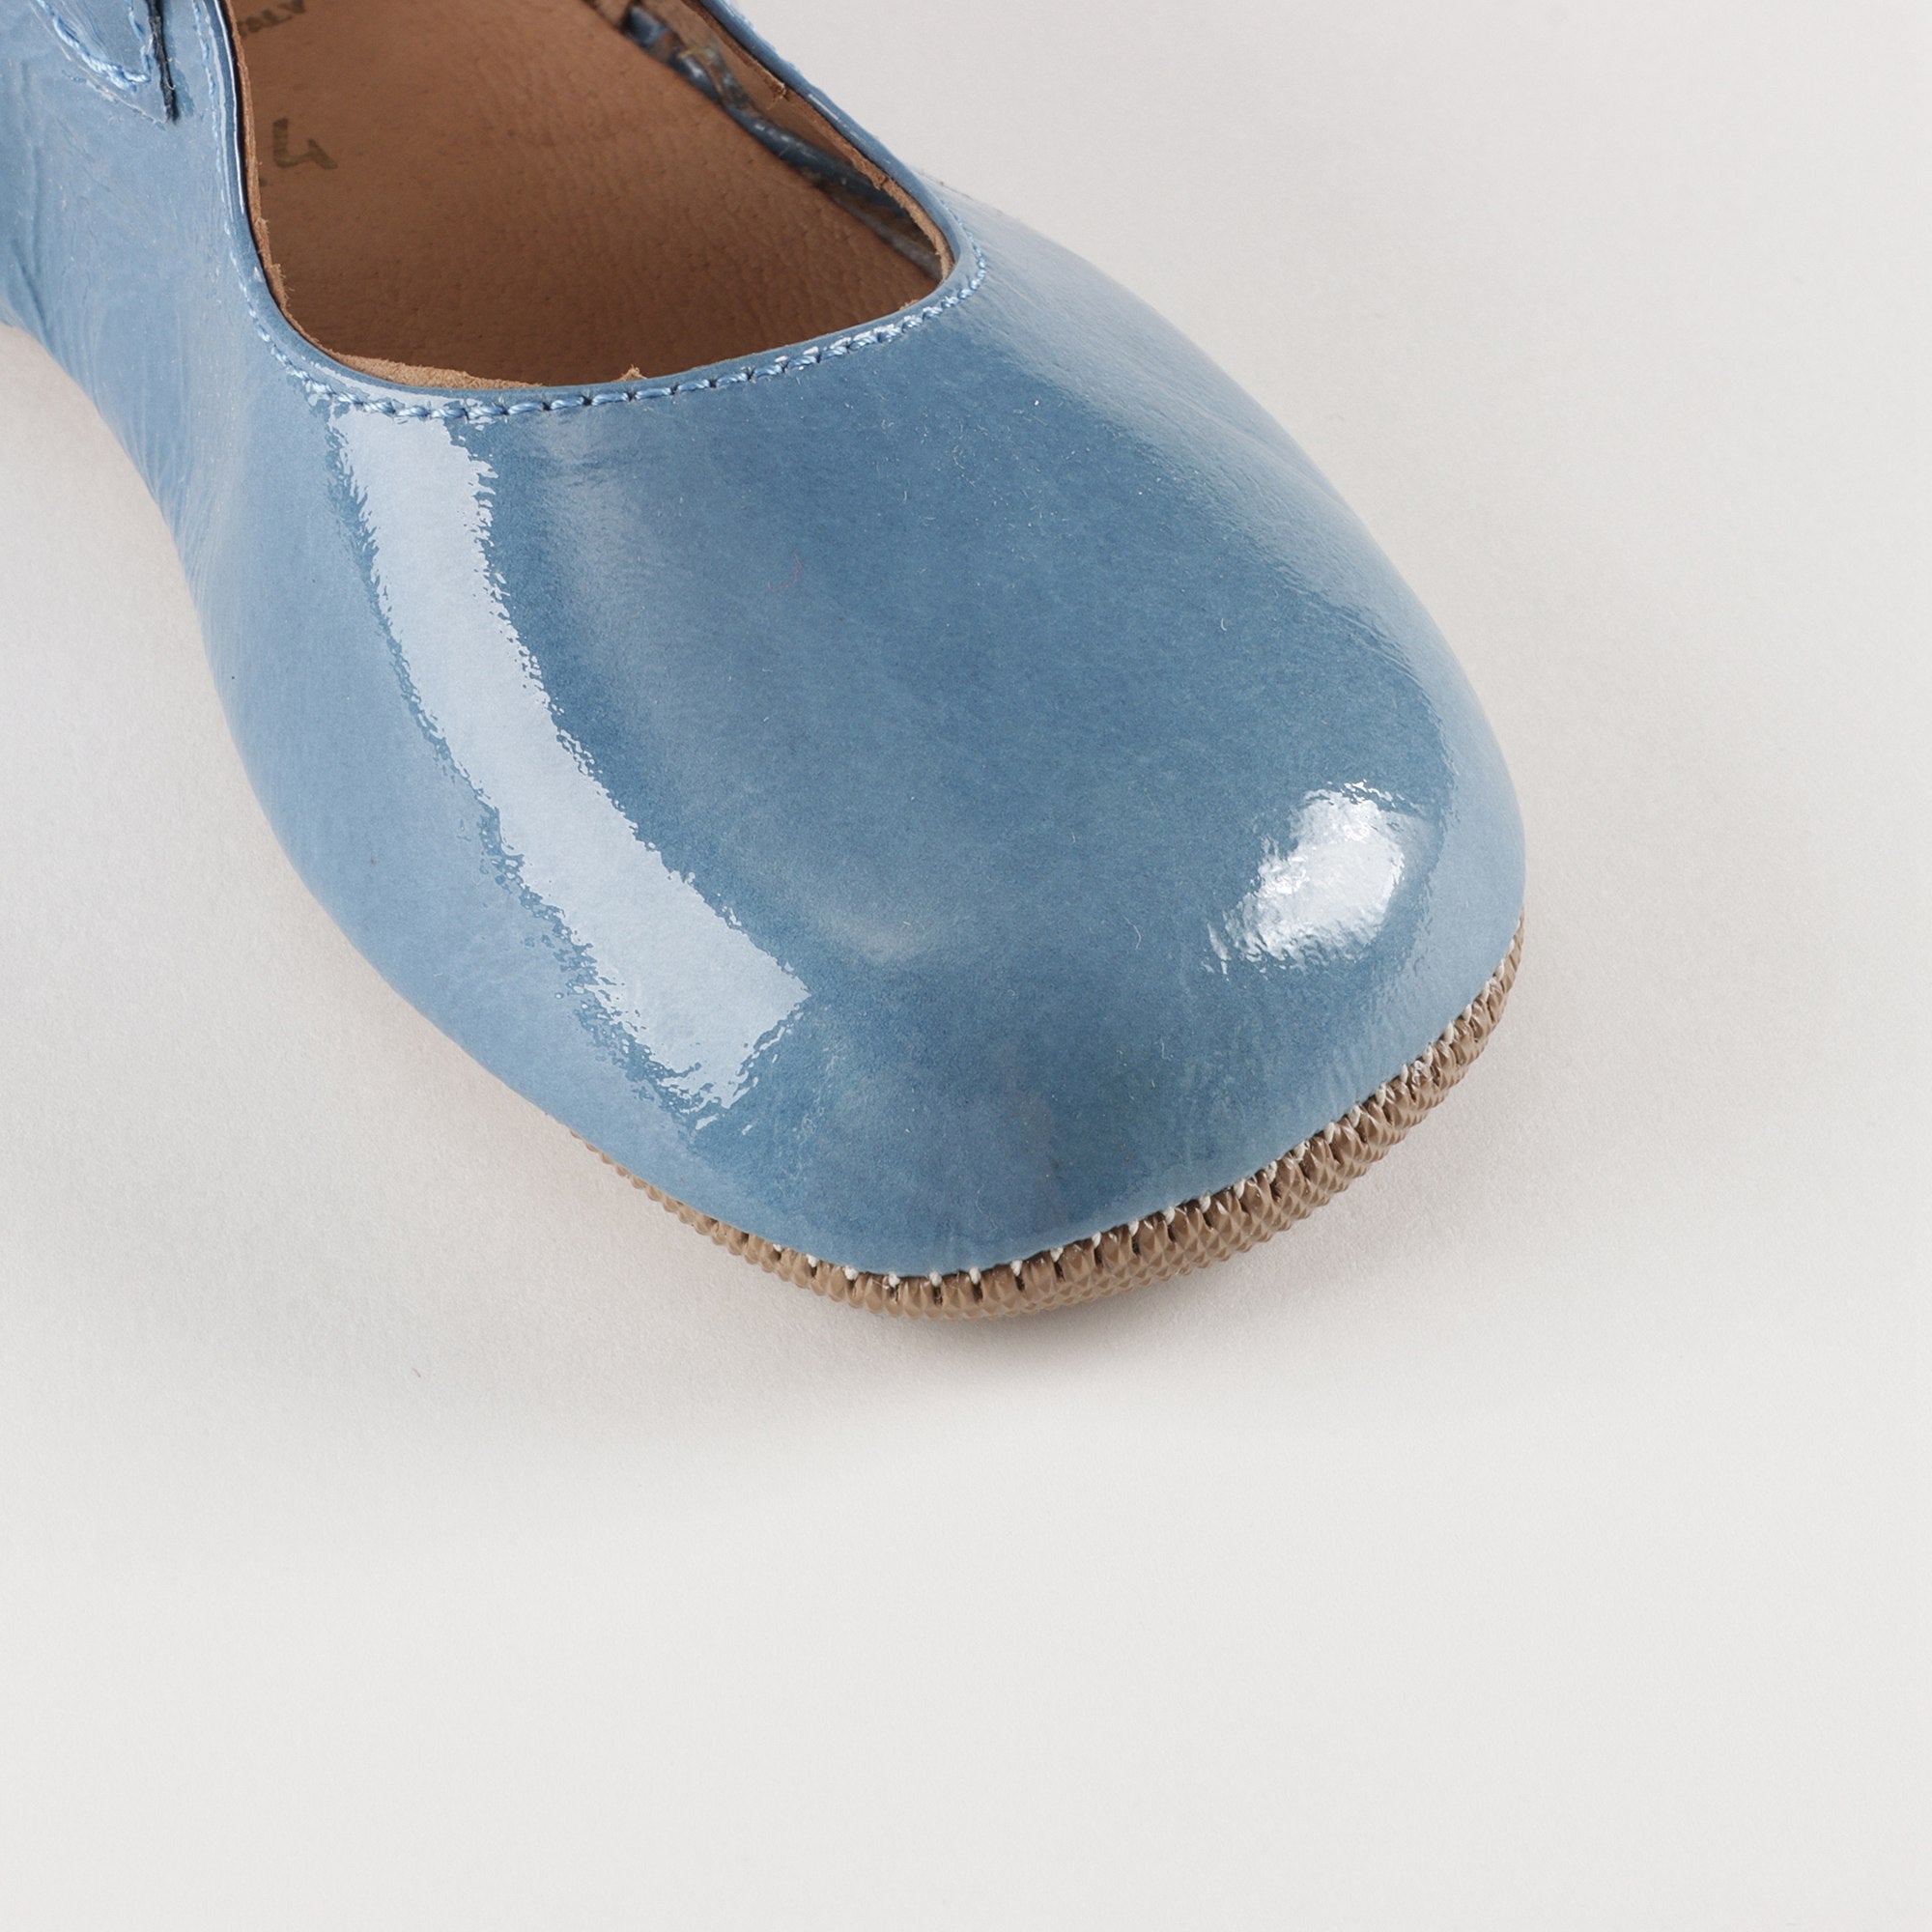 Girls Blue Leather Shoes